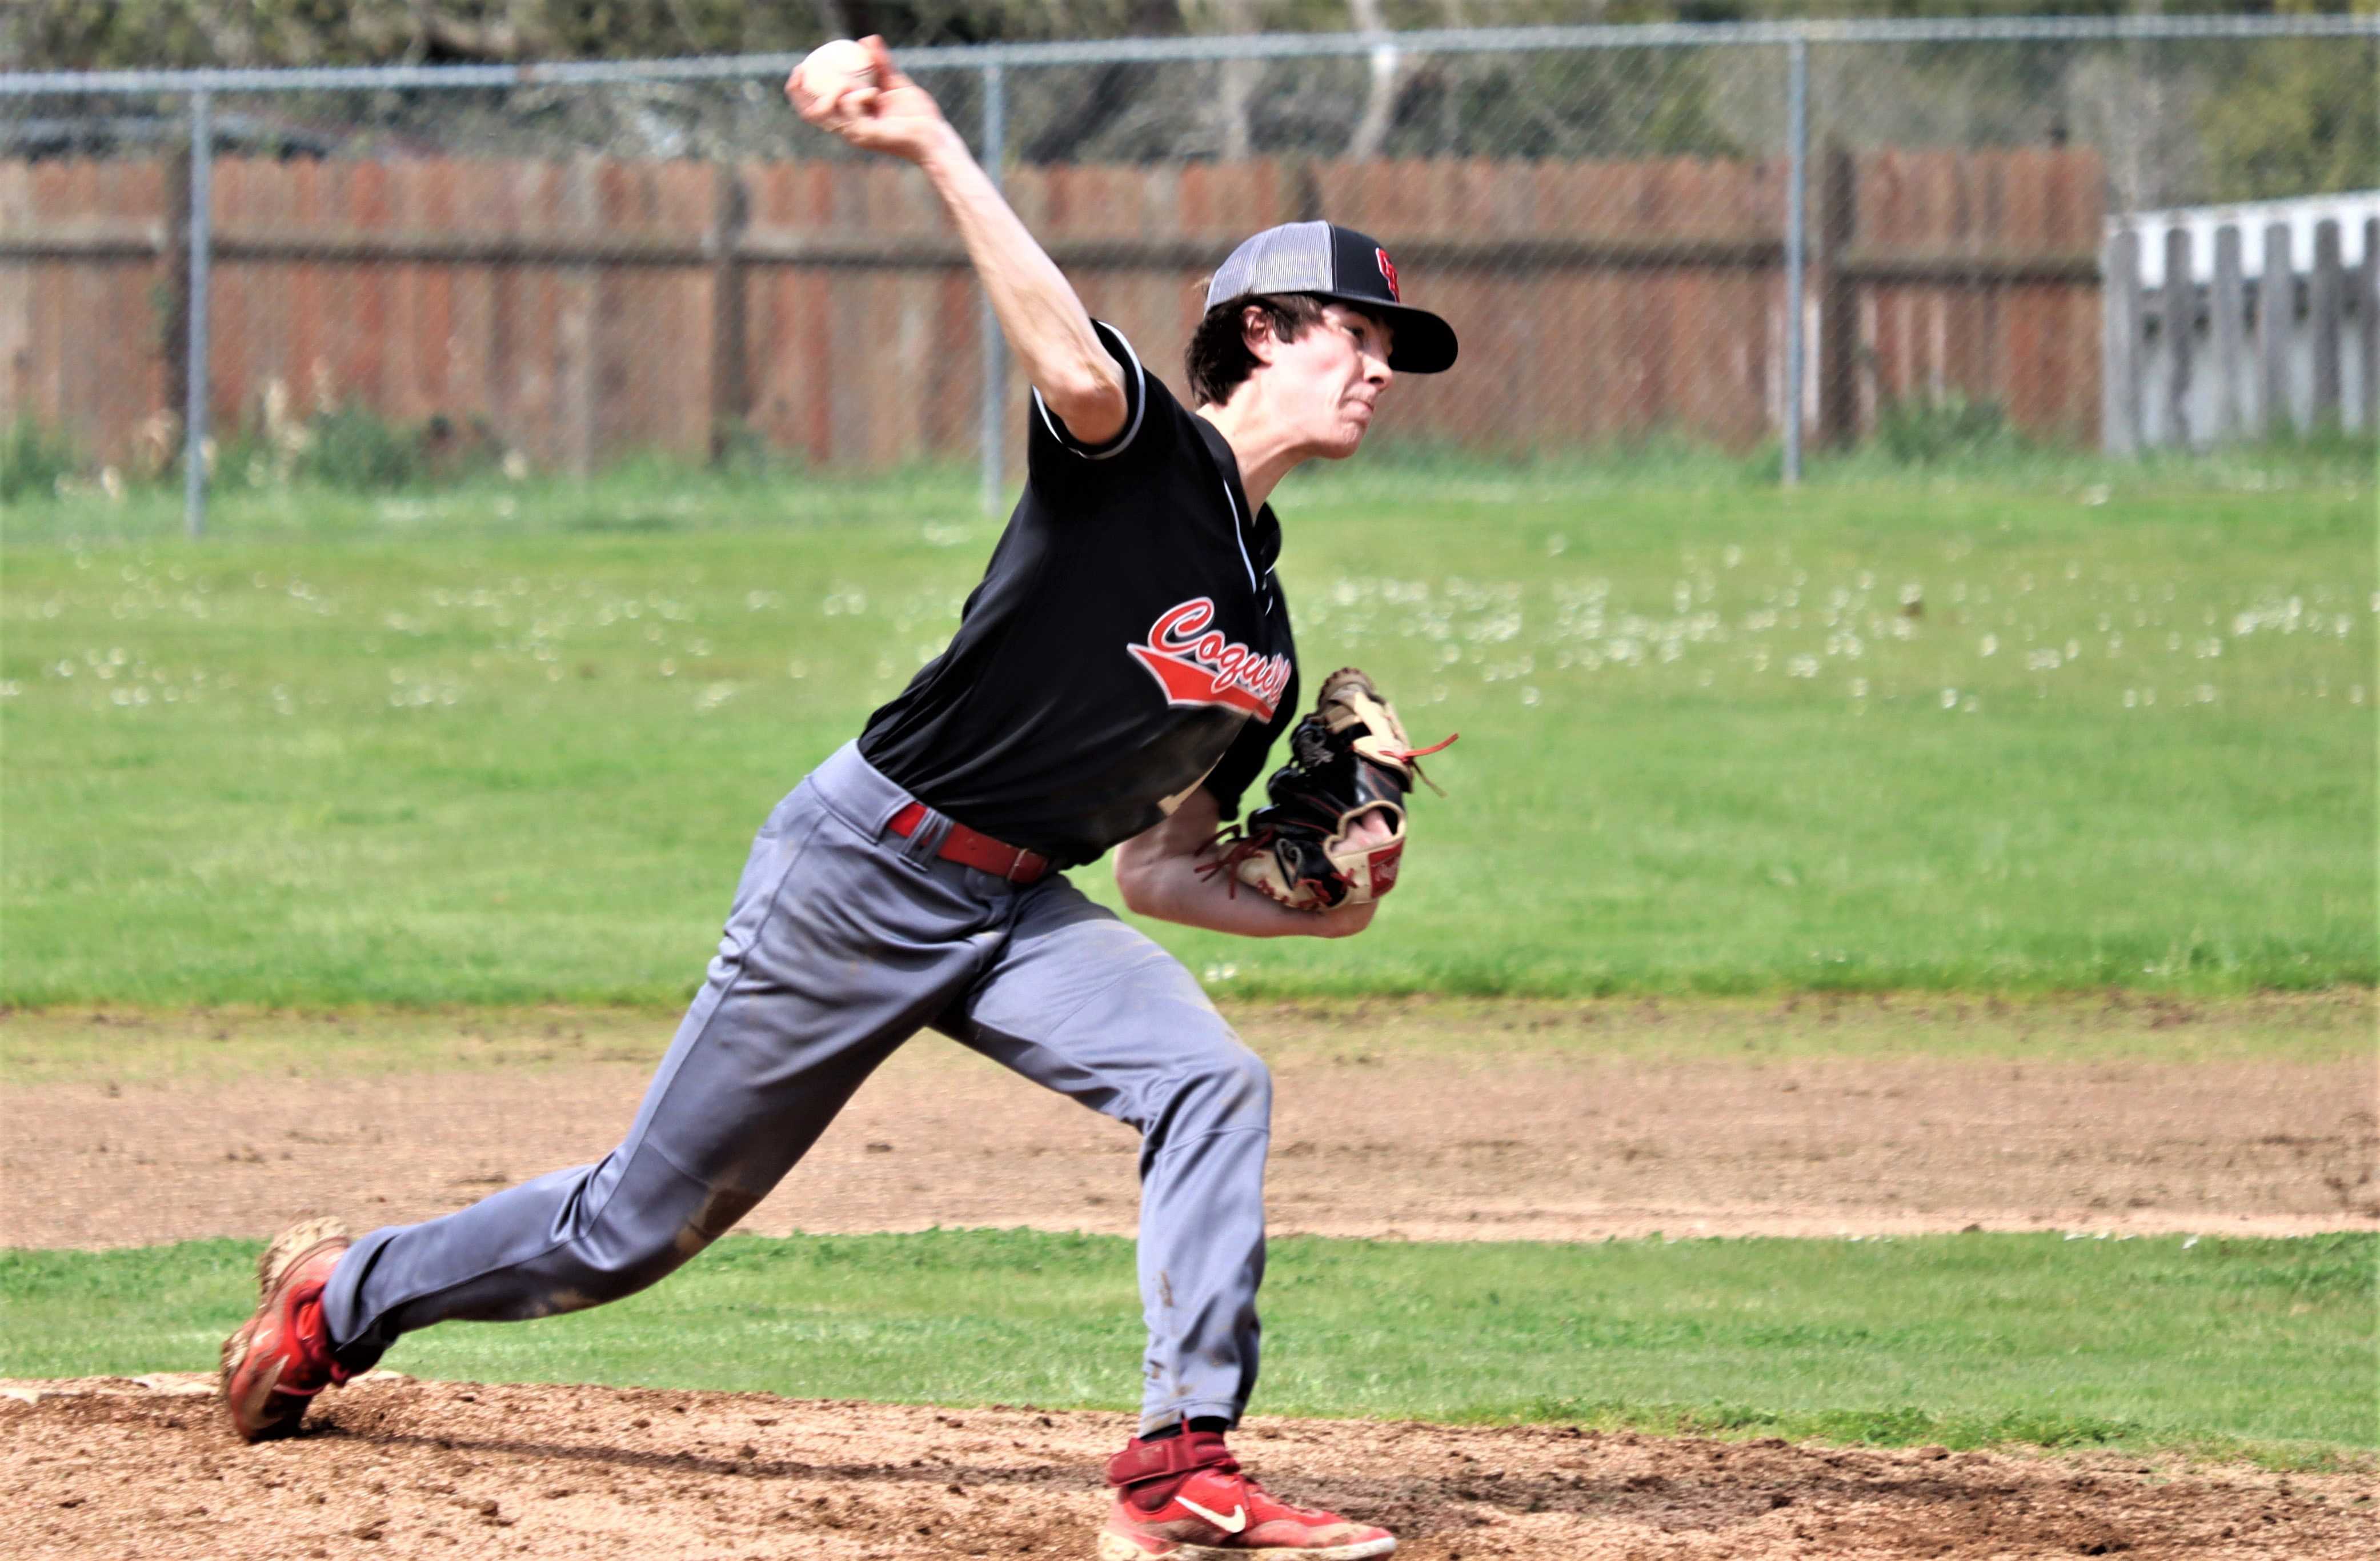 Coquille right Dean Tucker tossed a six-inning perfect game over Lakeview on April 22